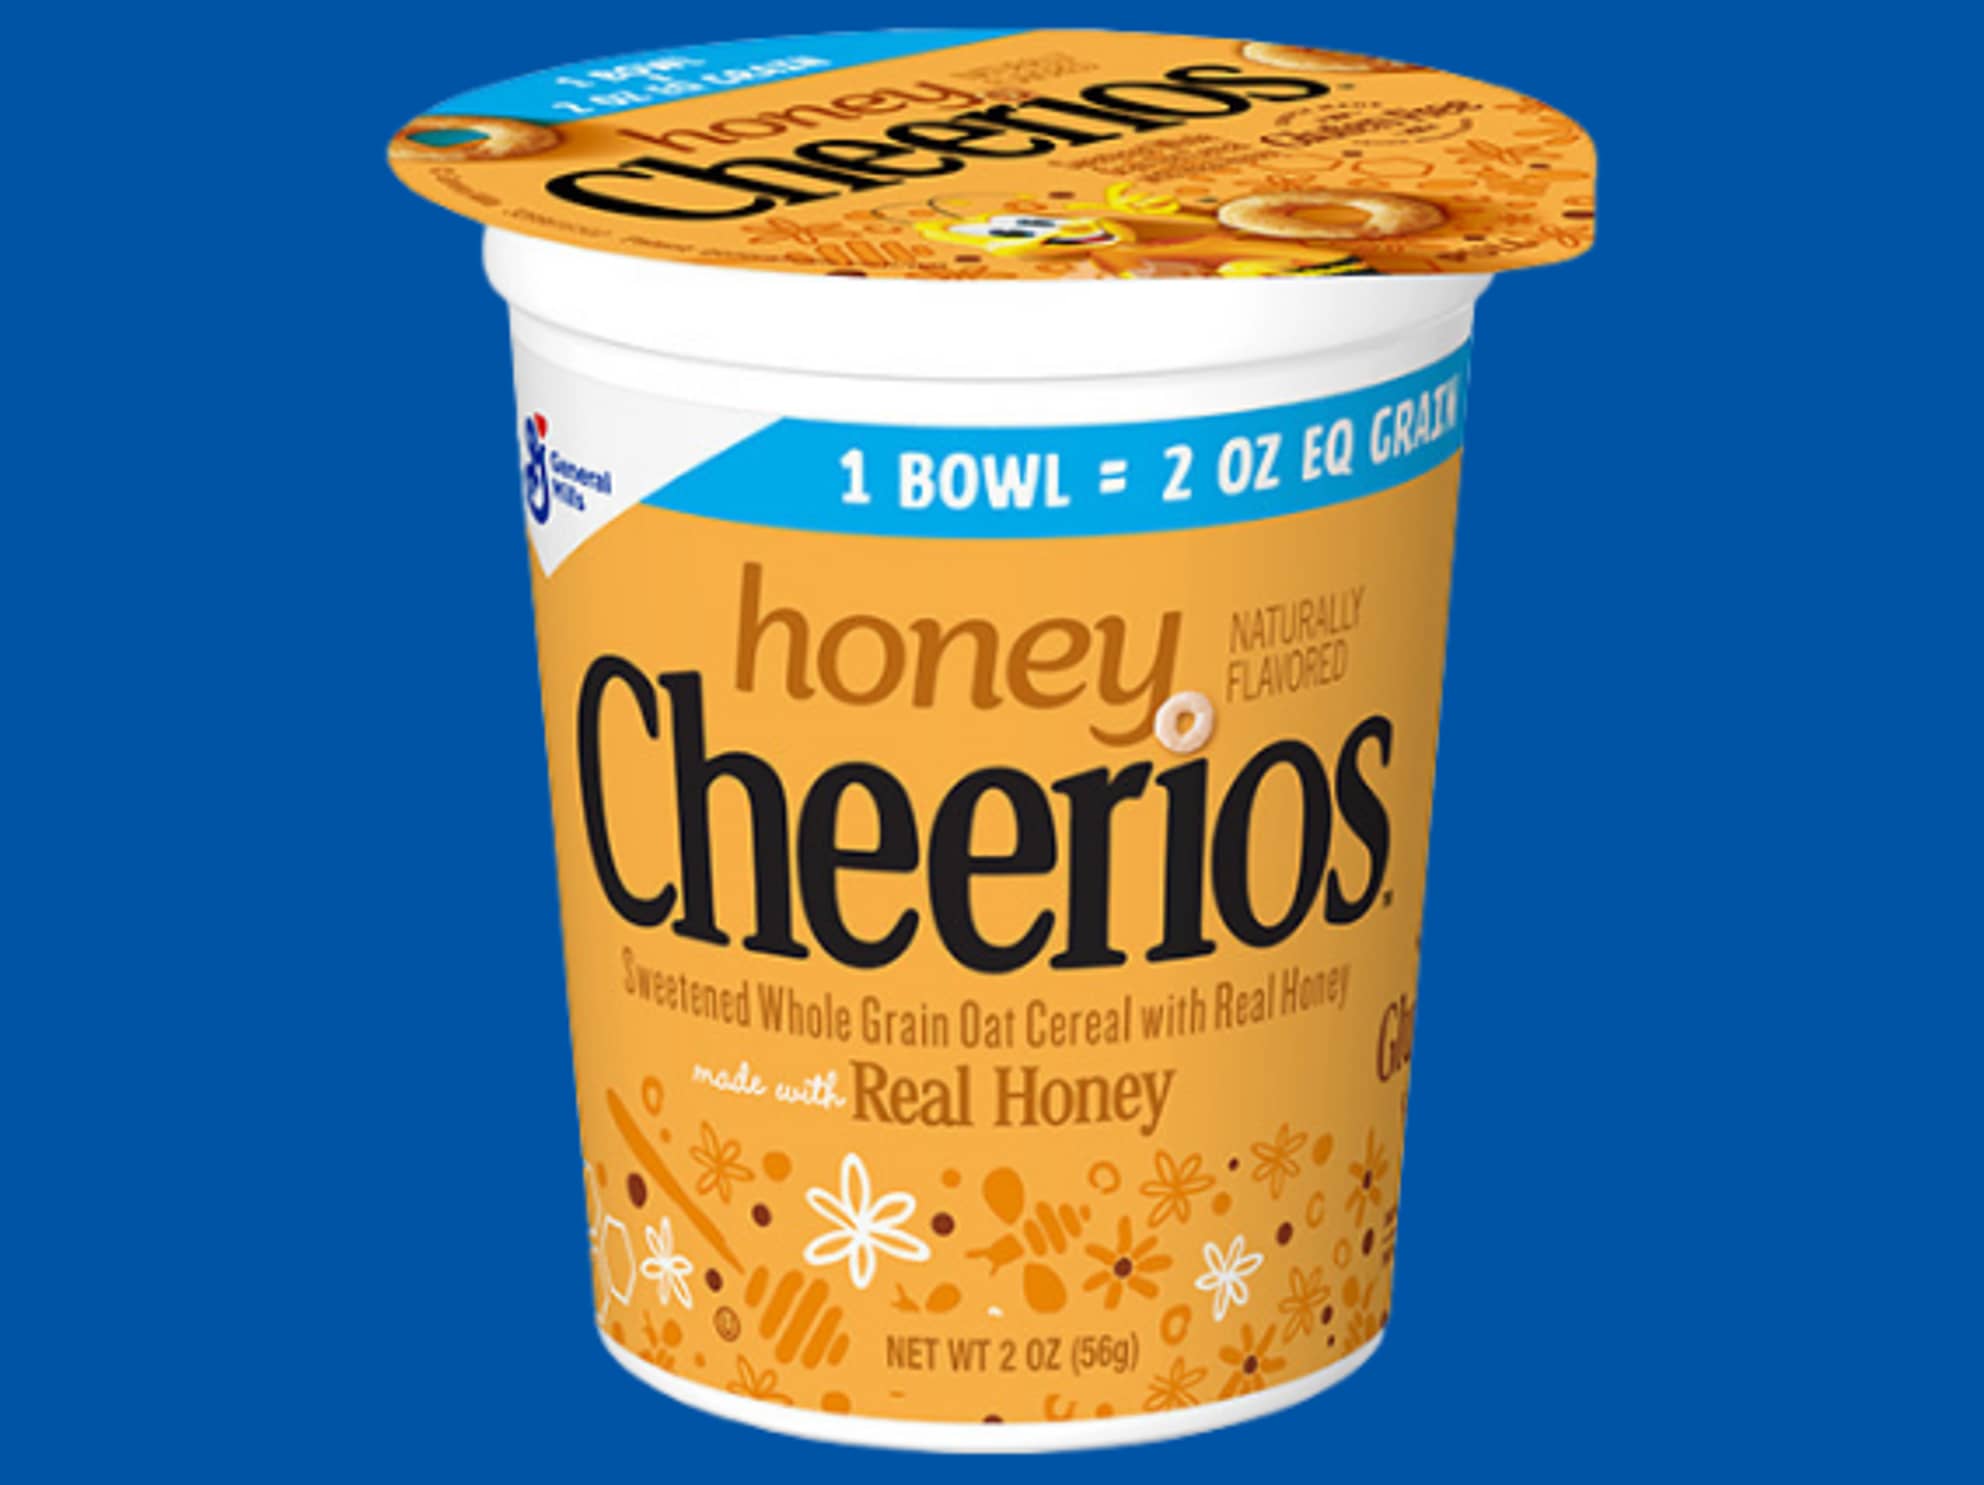 honey-cheerios-were-made-just-for-schools-general-mills